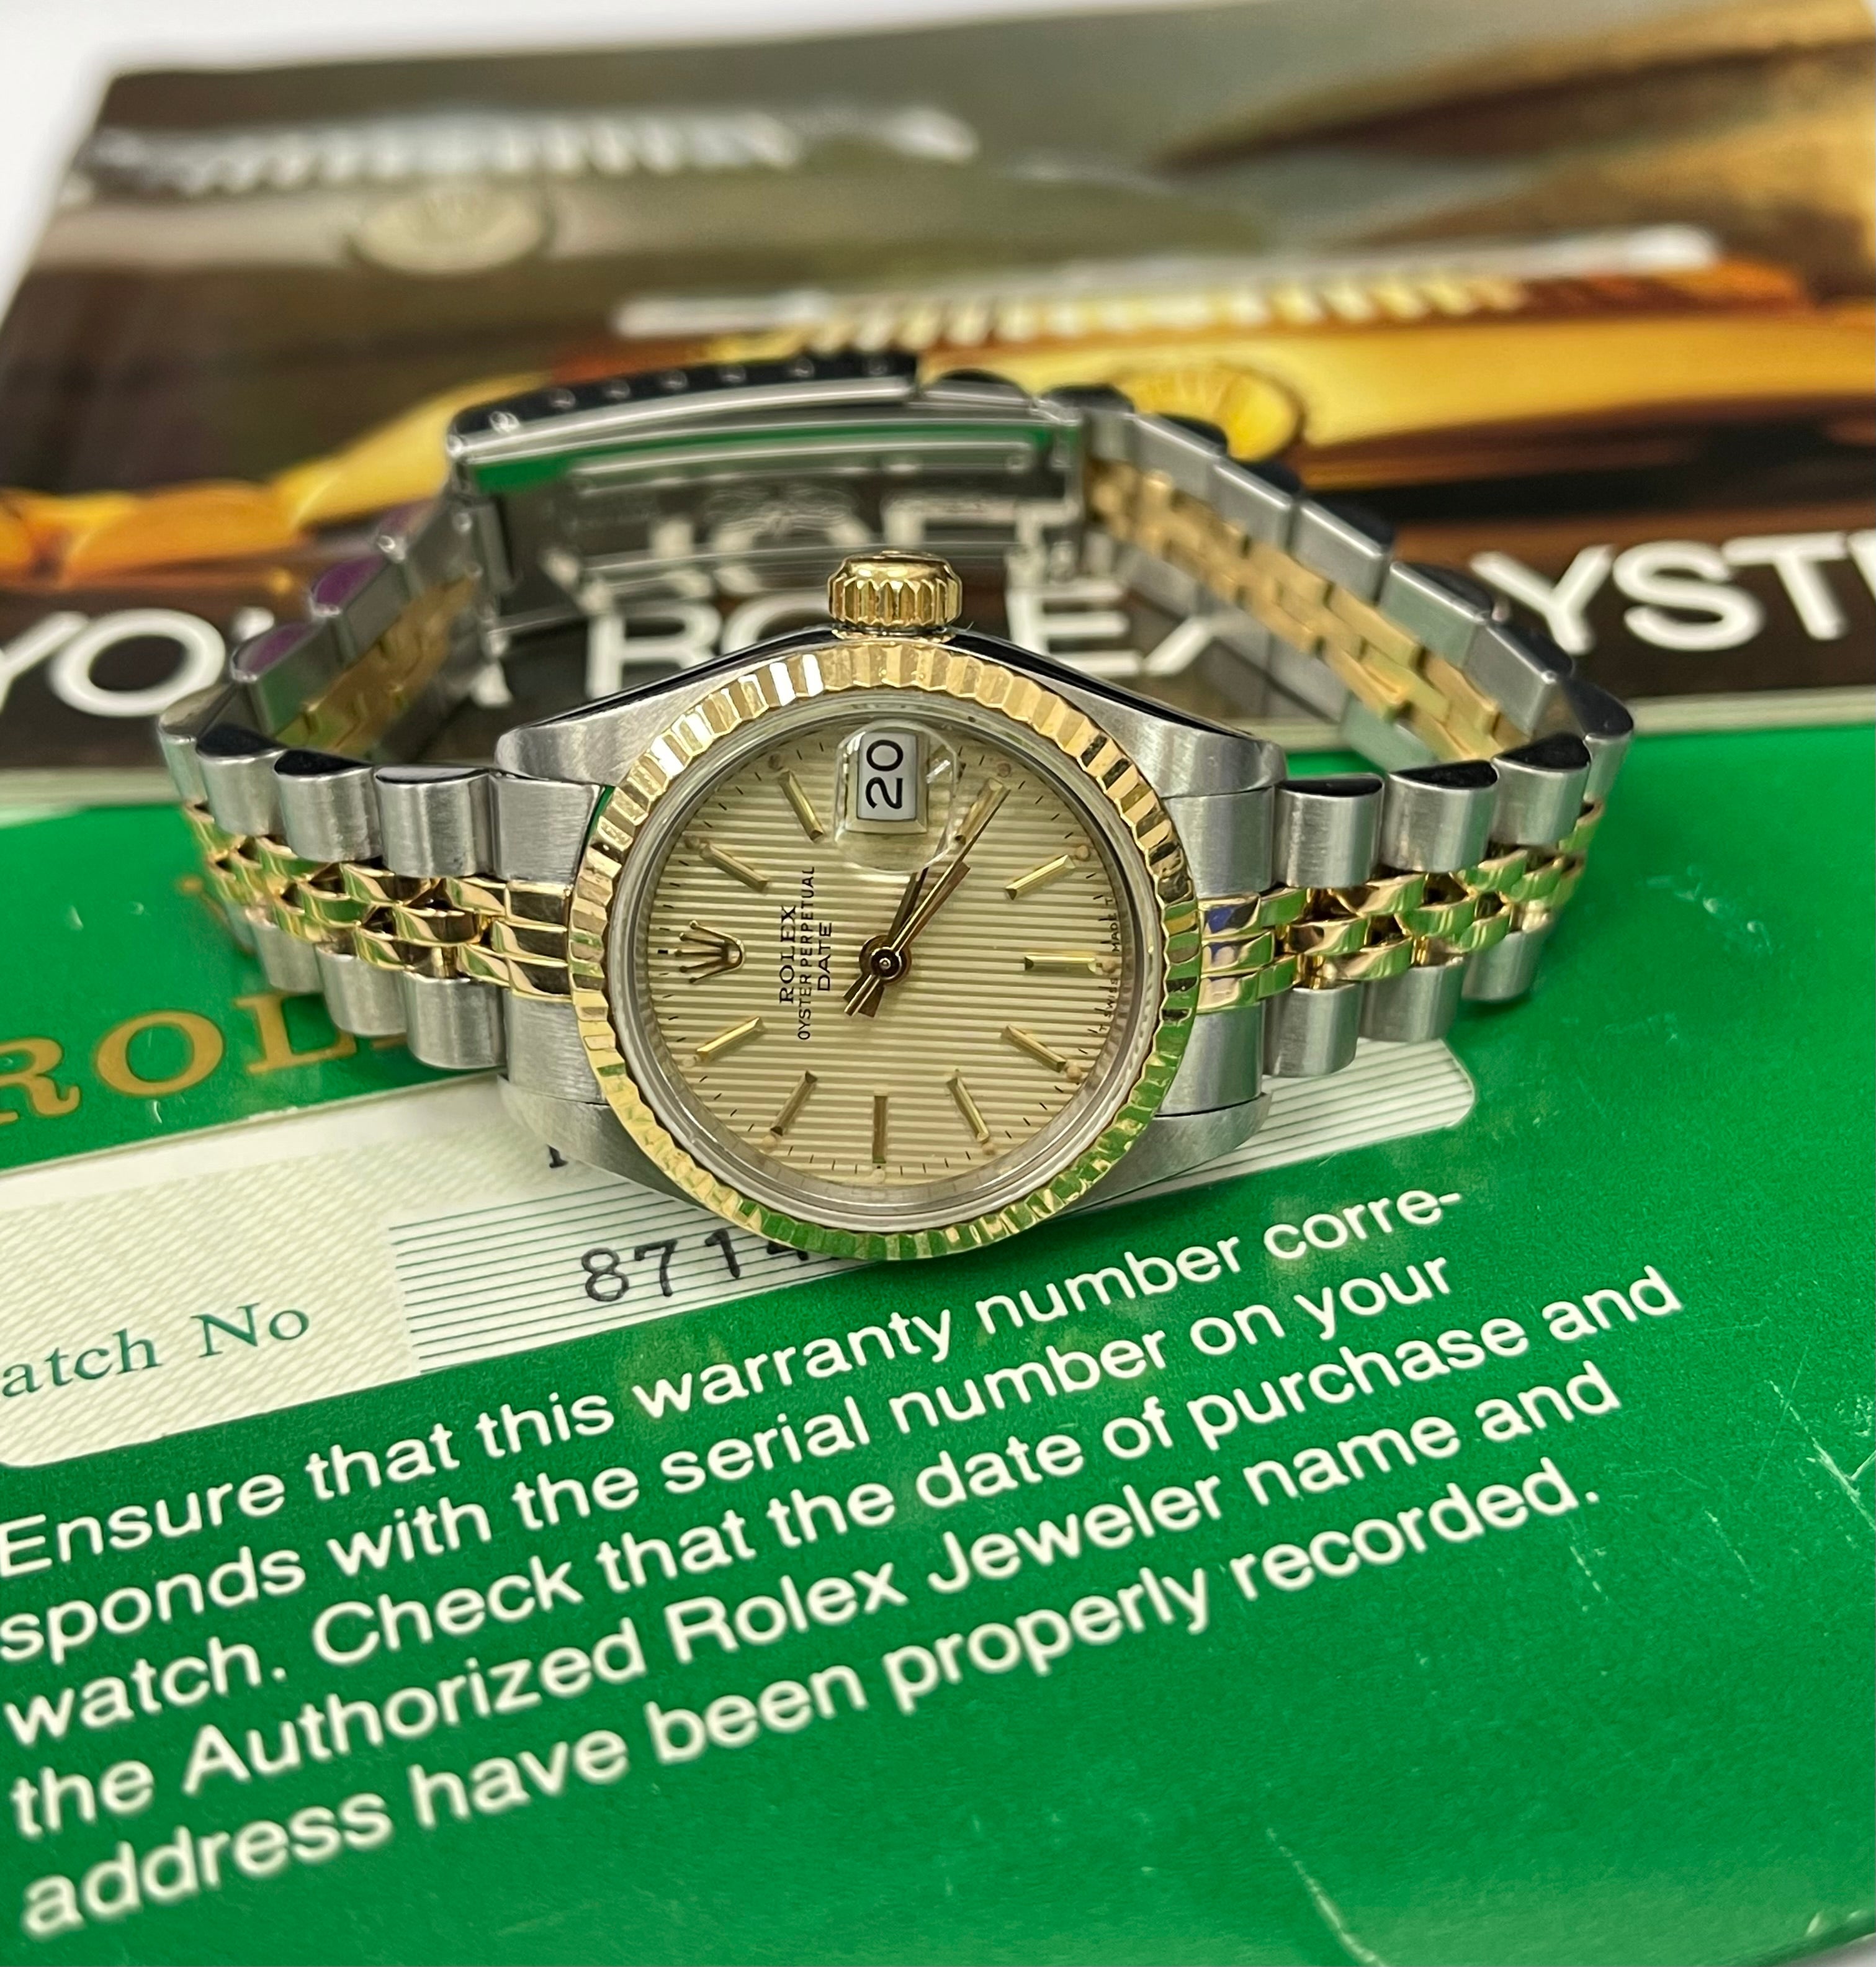 26mm Rolex 18k Yellow Gold Oyster Perpetual Datejust Watch.